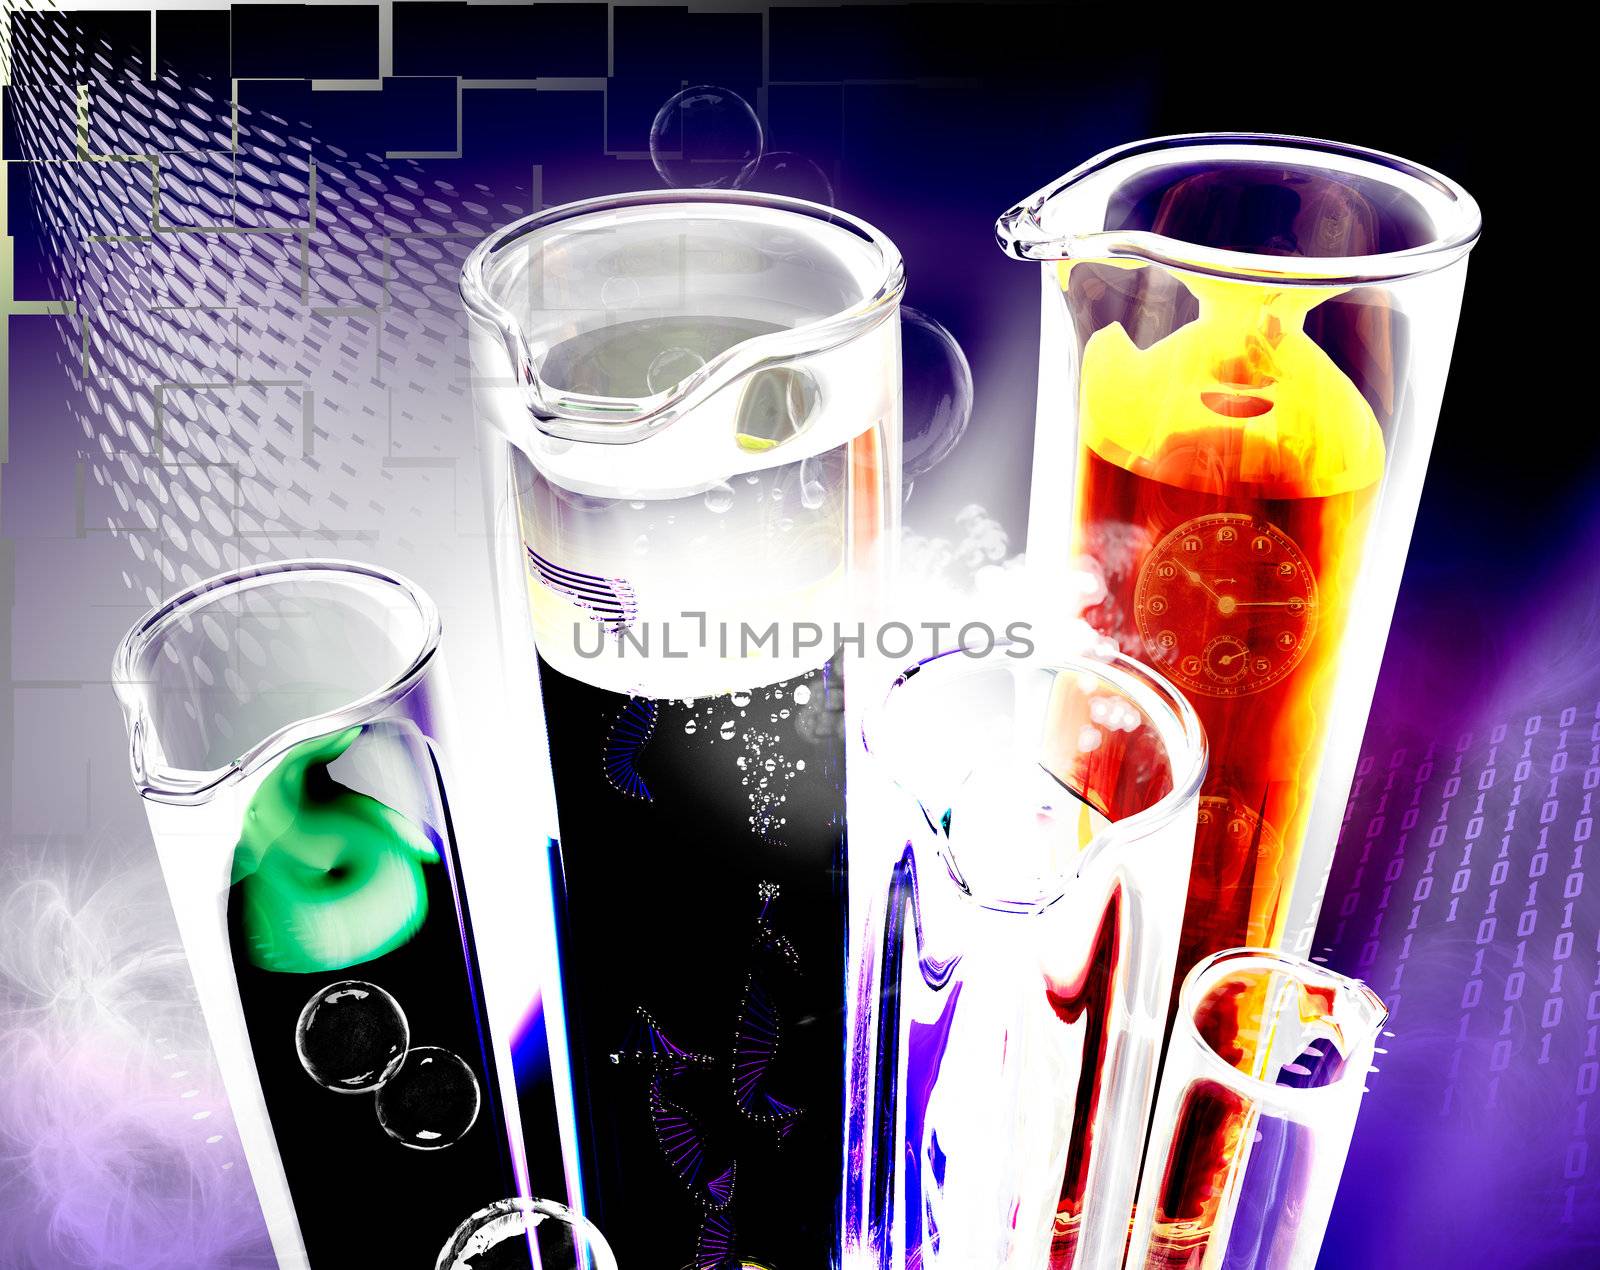 Image 3d test-tubes with liquid inside